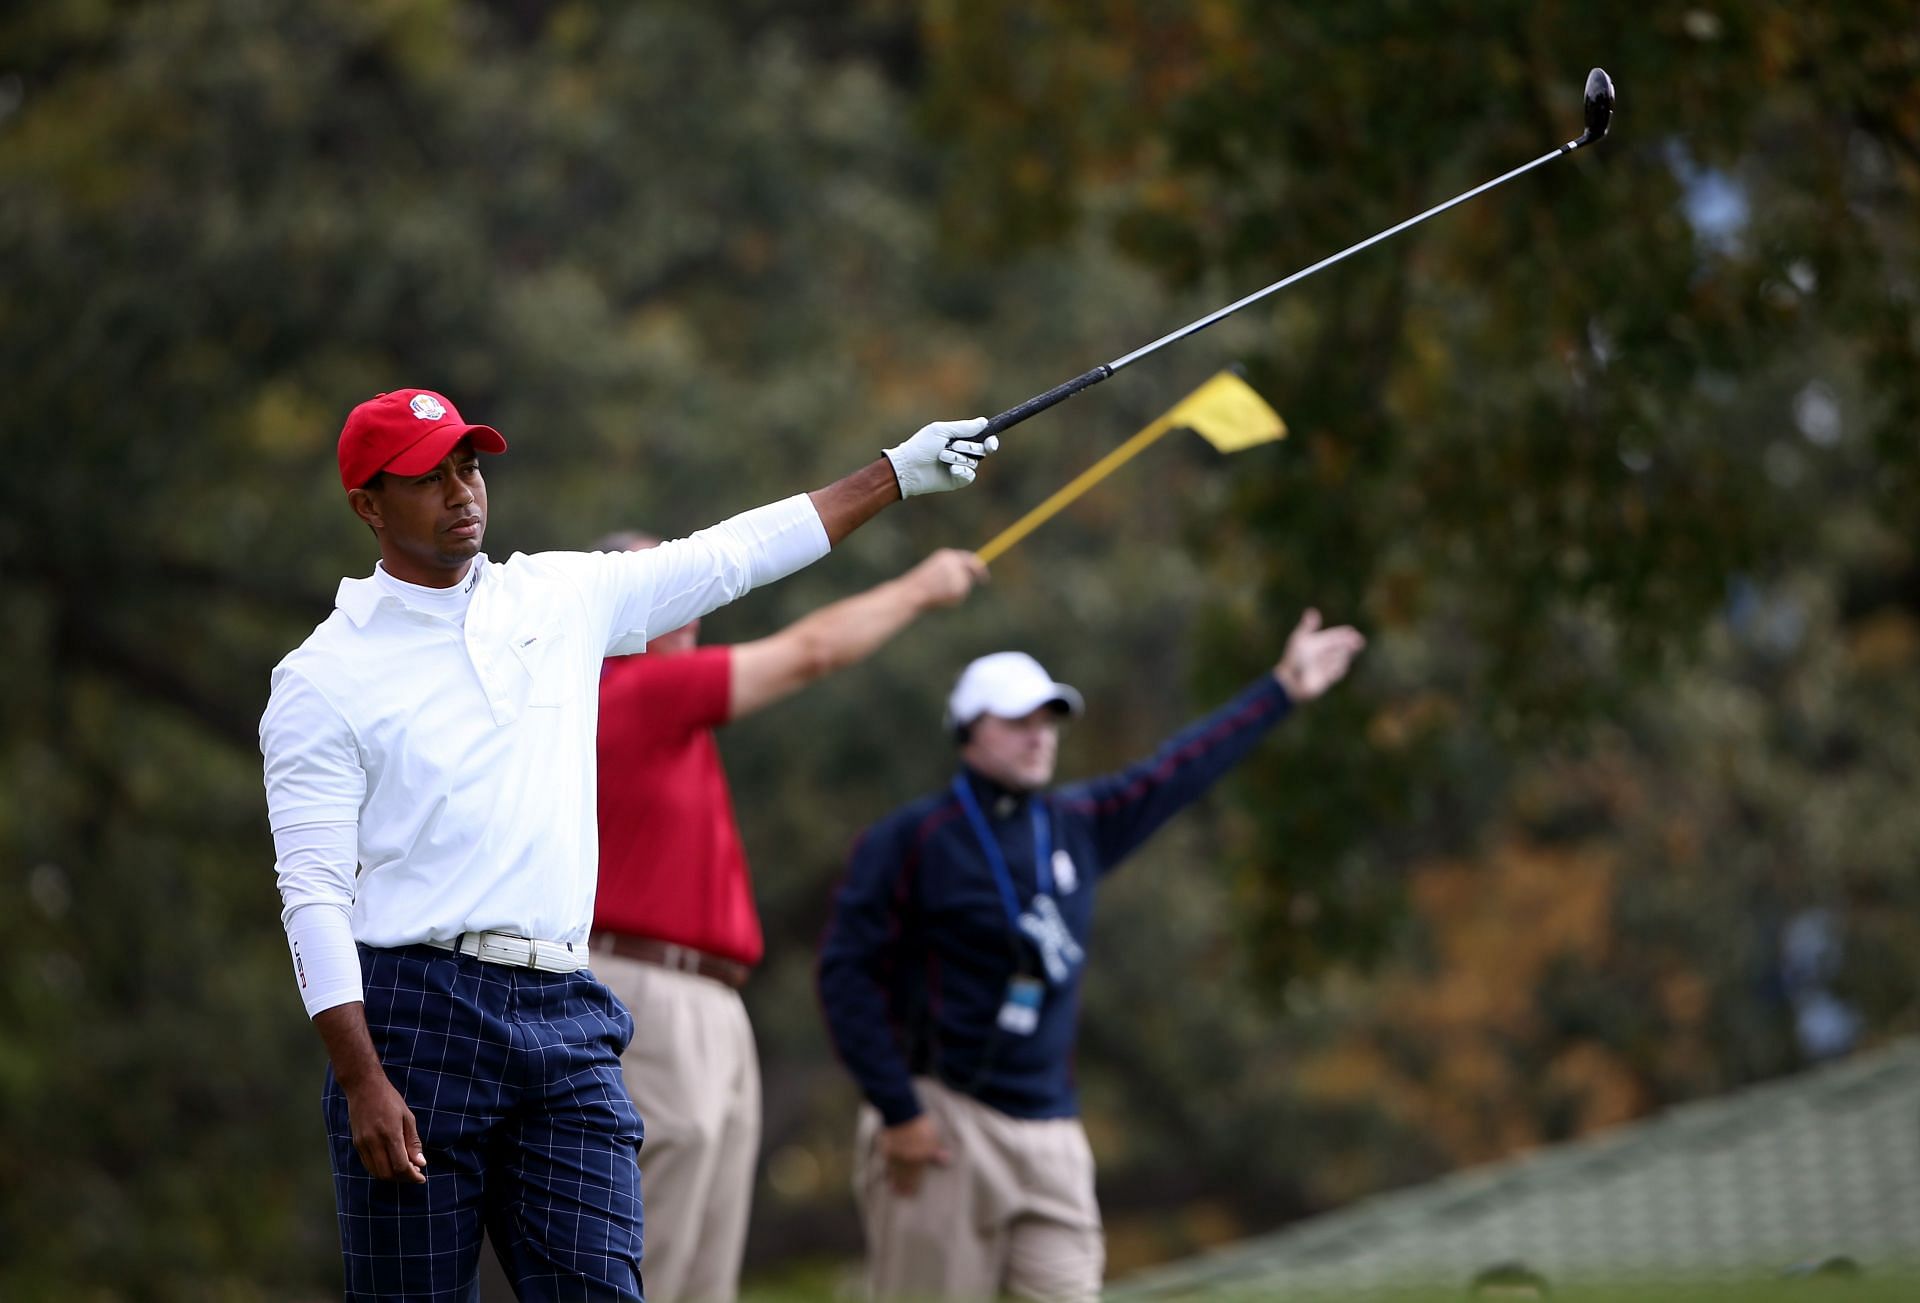 Tiger Woods reacts to a poor tee shot on the 15th hole during the 2012 Ryder Cup, Day 1 Foursome